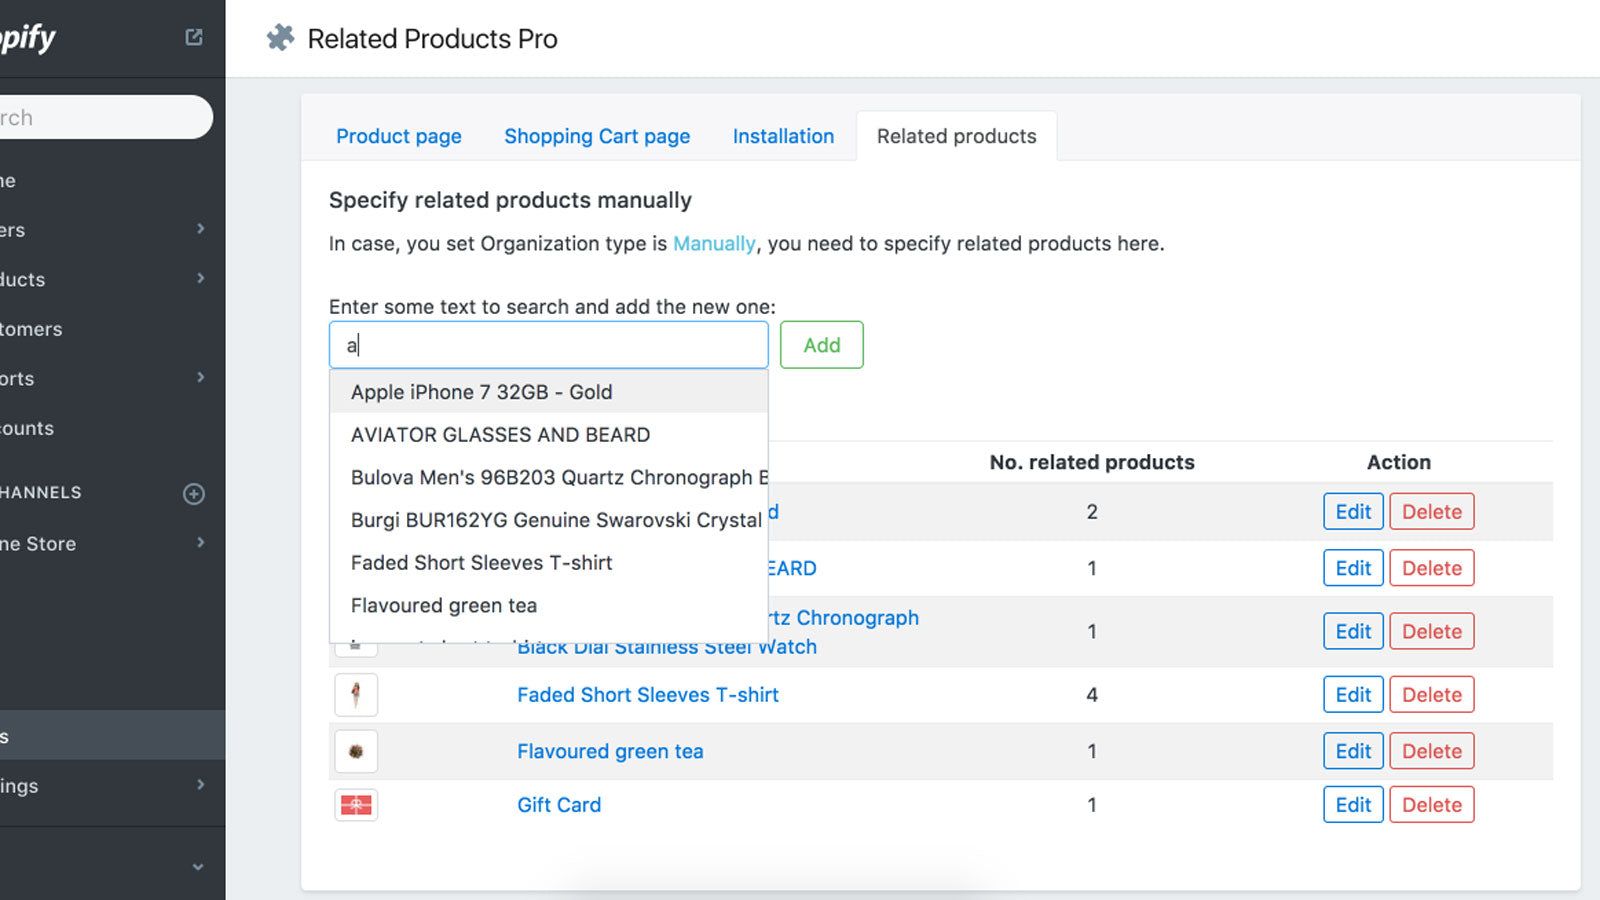 Management view: Add new related products